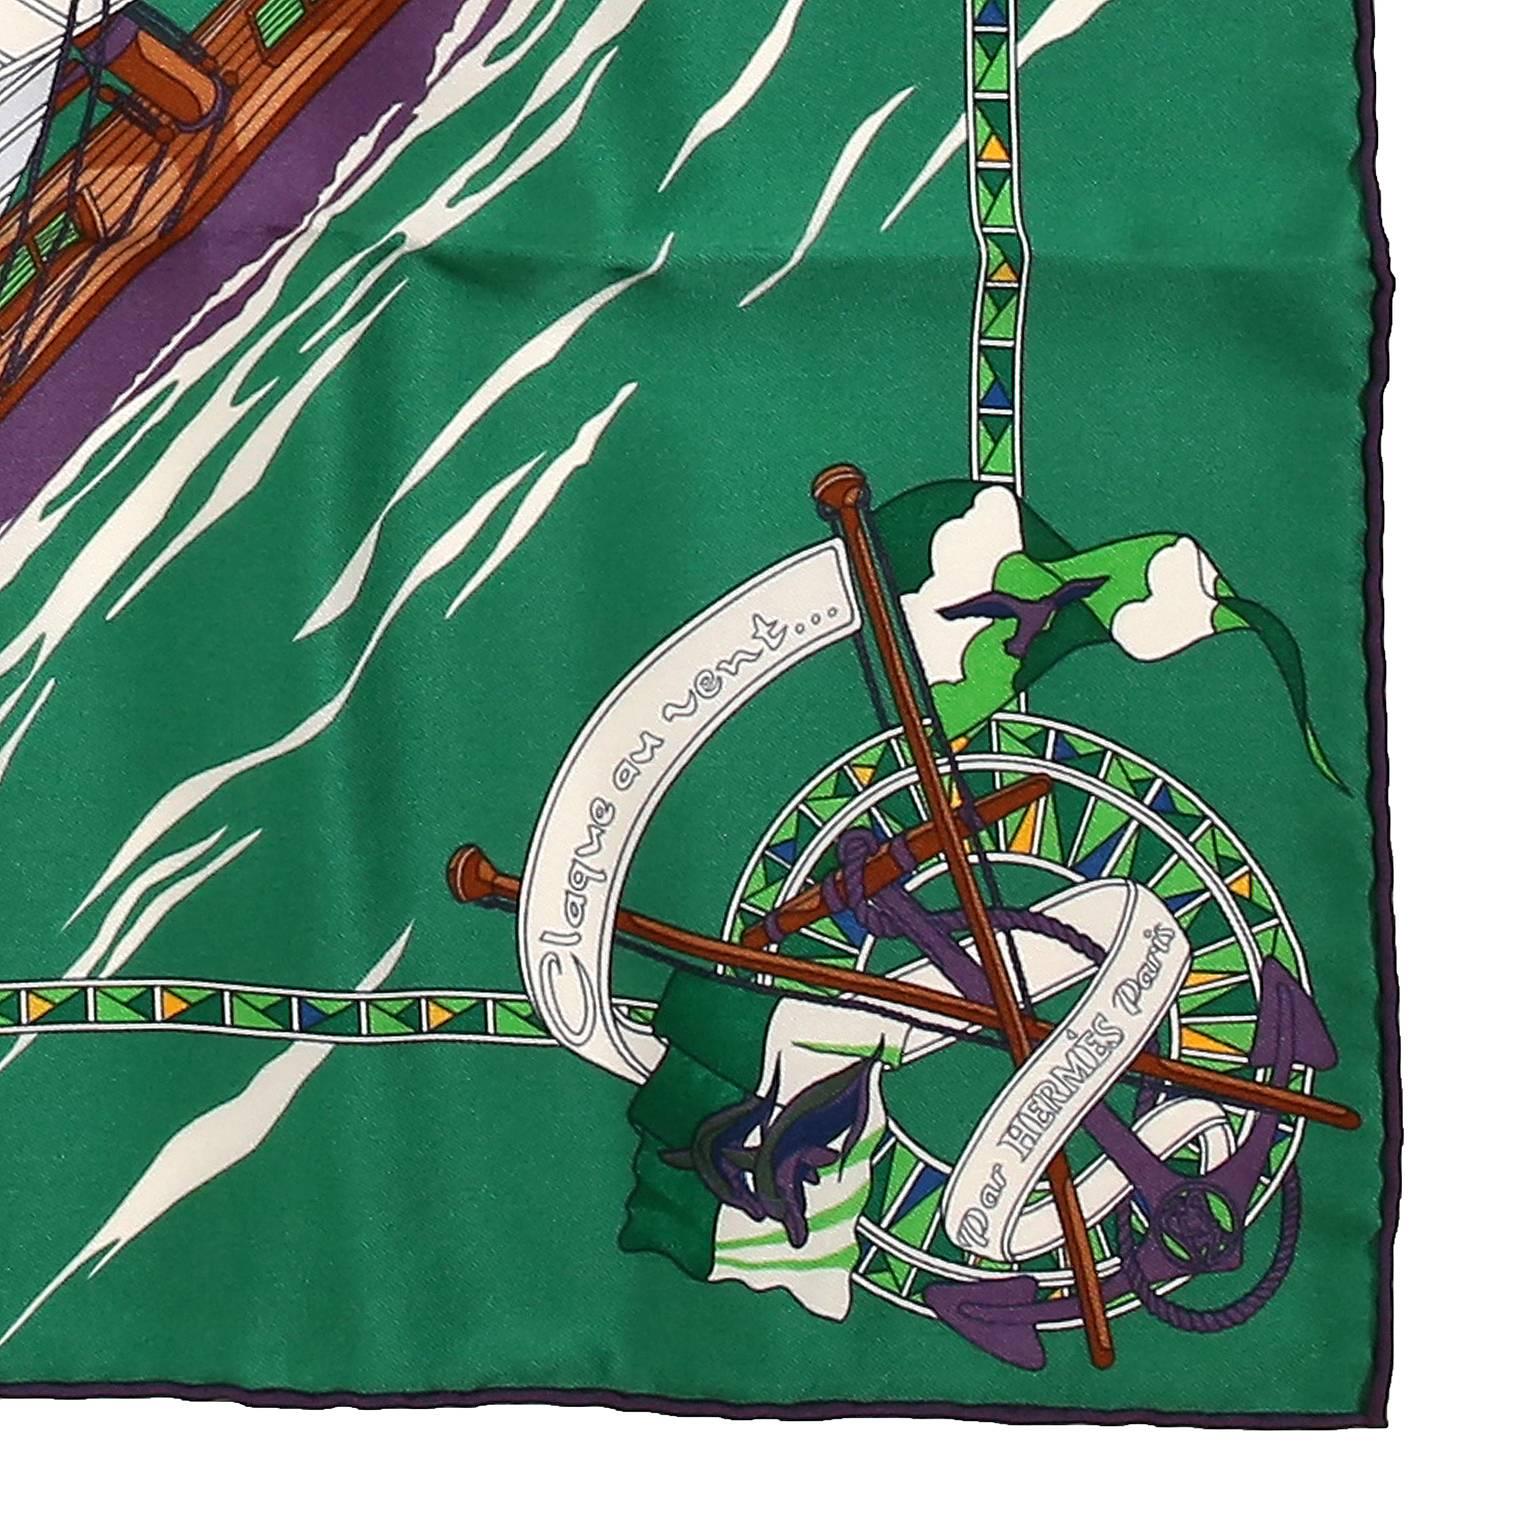 This authentic Hermès Green Claque au Vent 90 cm Silk Scarf is new.  Original issue 2011 and designed by Dominik Jarlegant.  Bright green background with sailboats and flags on the water.  “Slap in the wind” refers to the sound of a sail in a